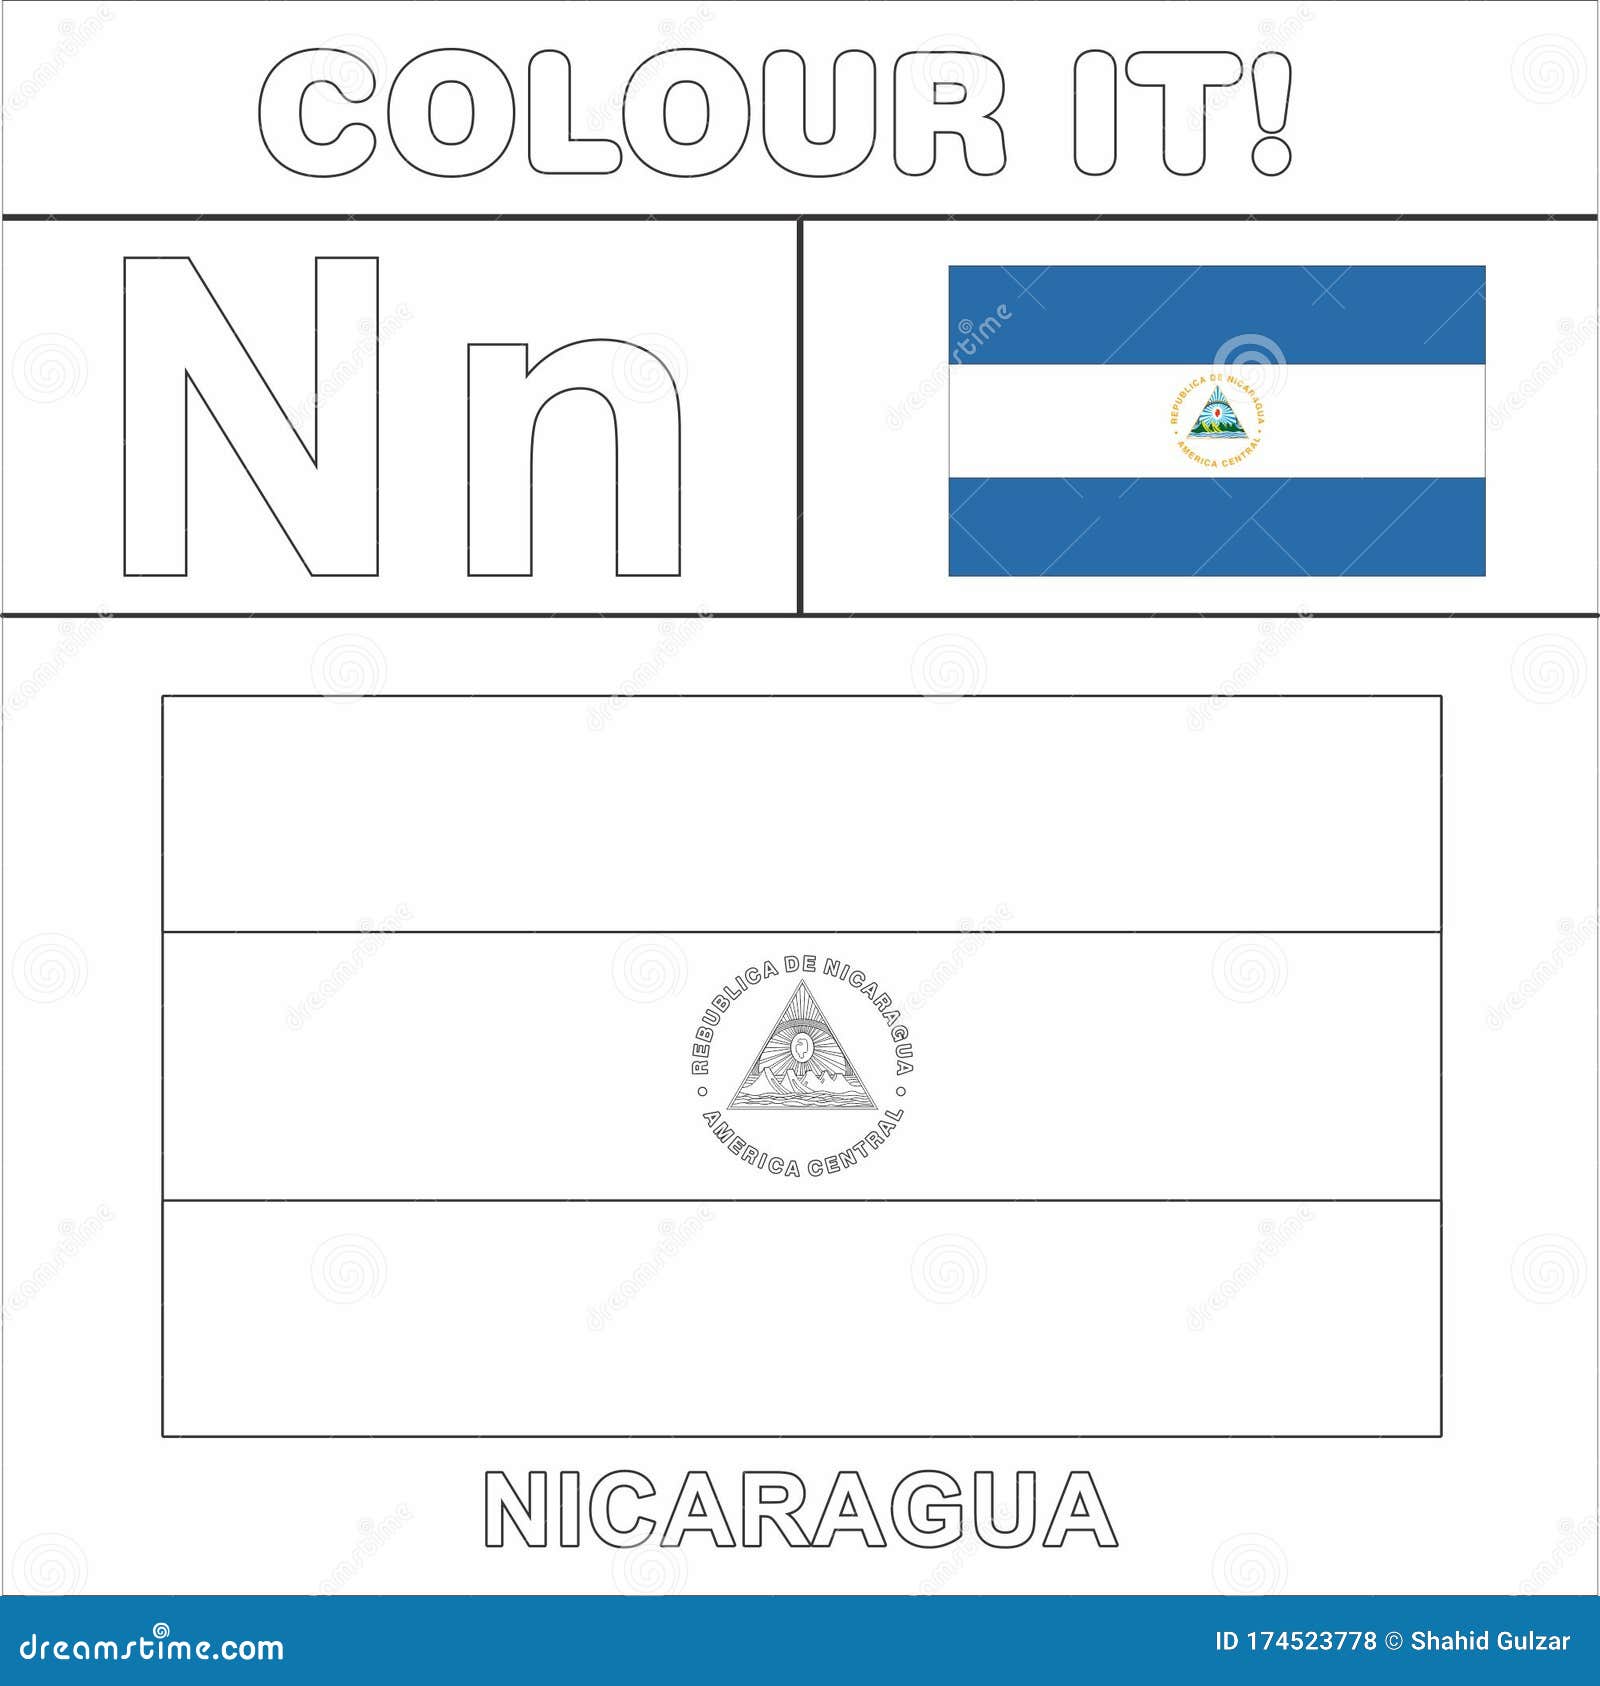 Colour it kids colouring page country starting from english letter n nicaragua how to color flag stock illustration